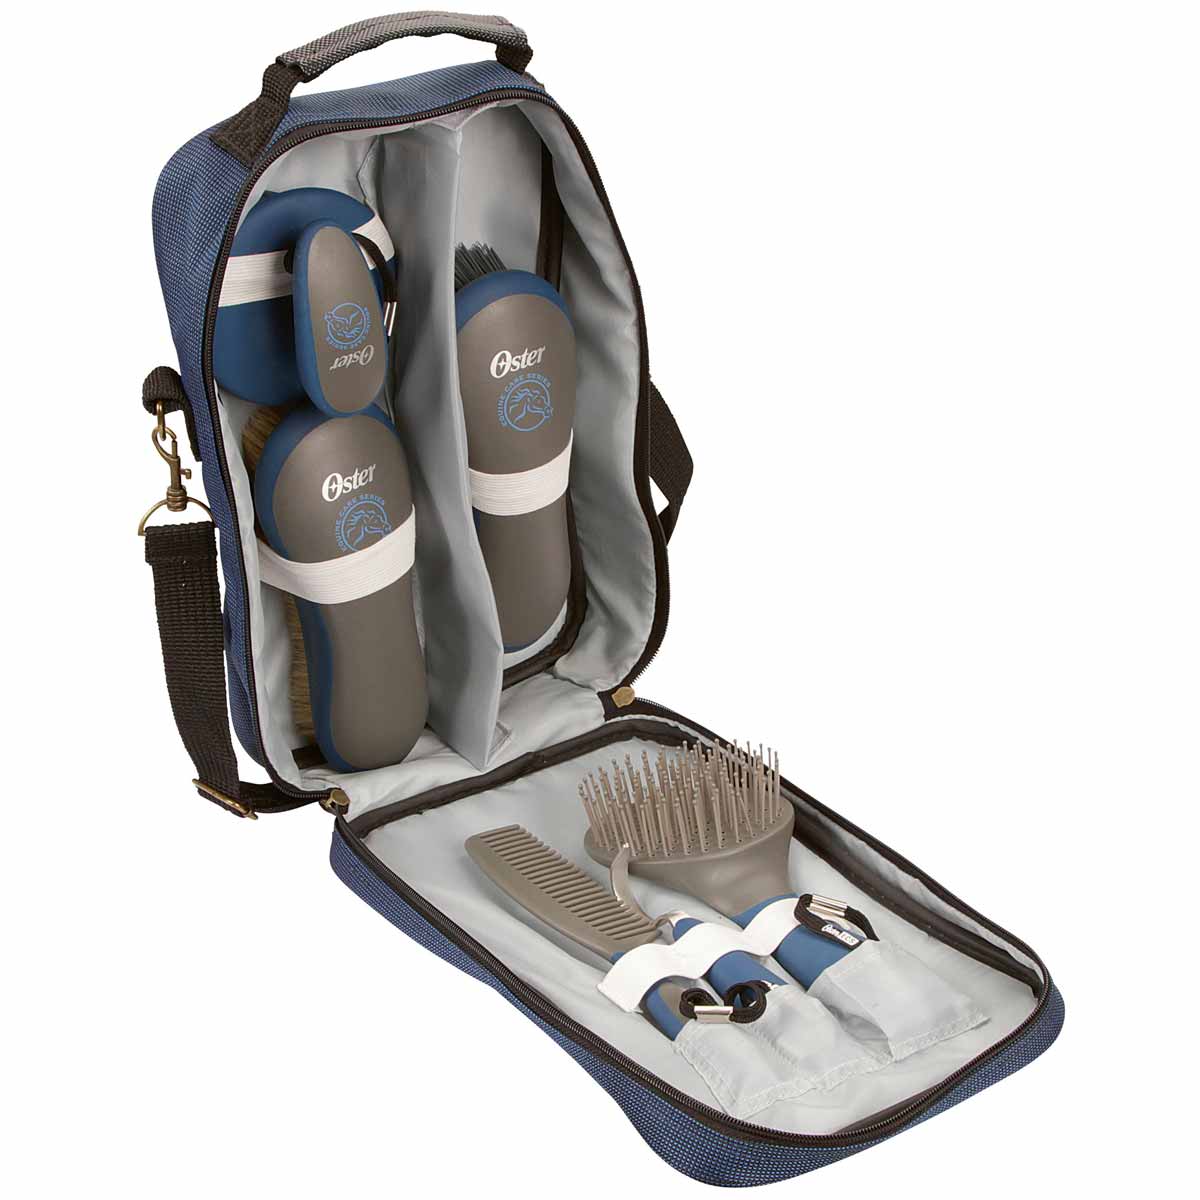 Oster Equine Care Series 7-Piece Grooming Kit - Blue